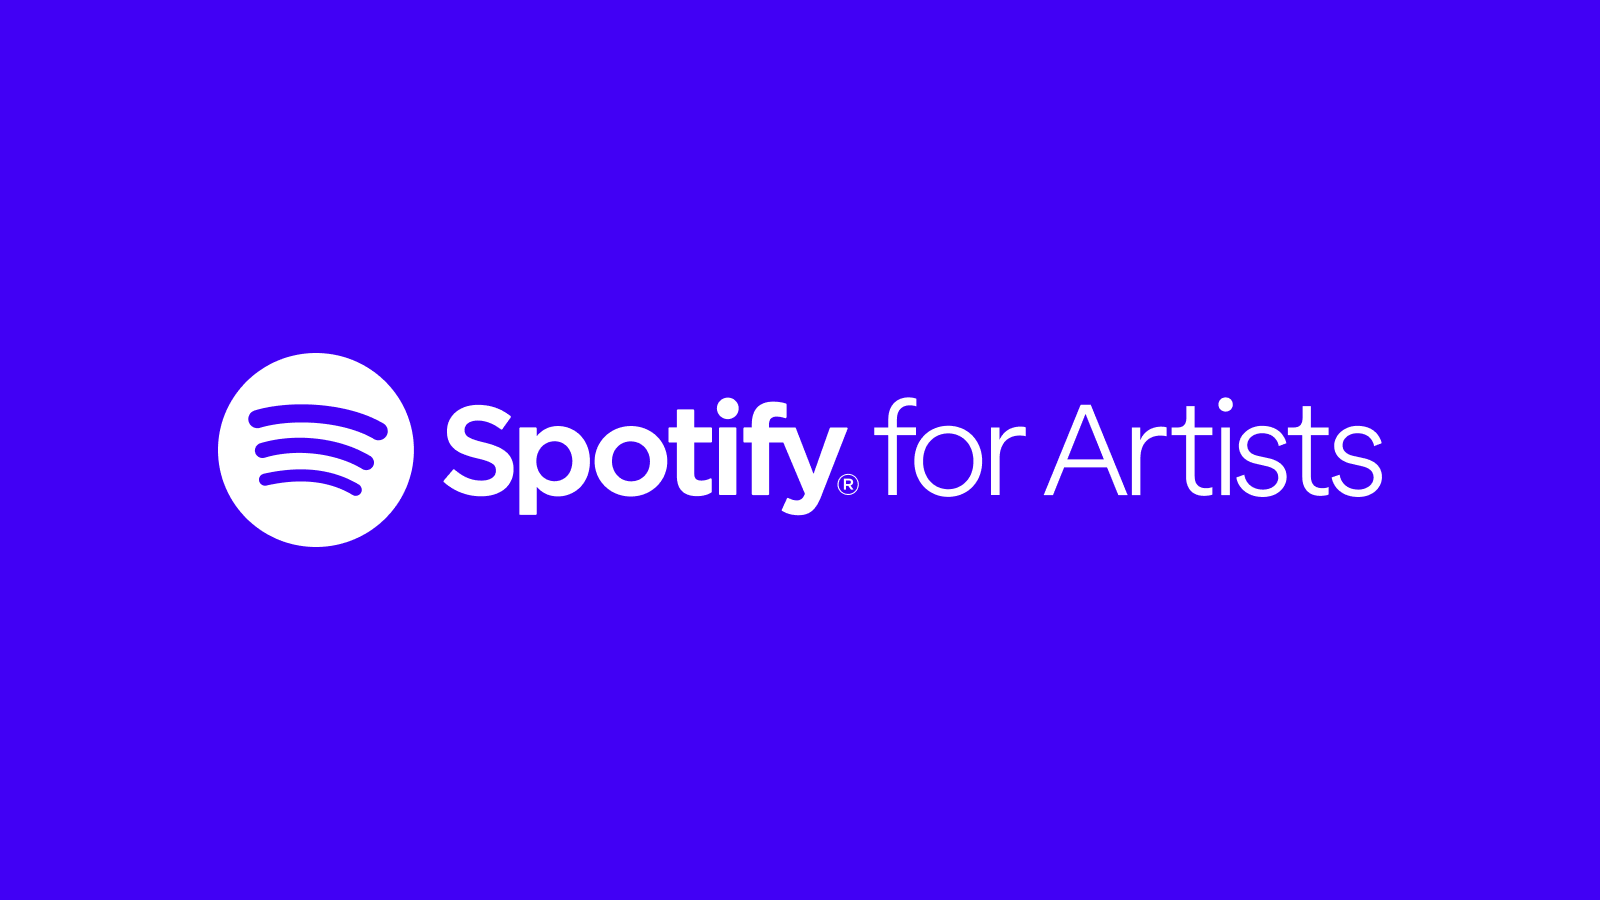 The Complete Guide to Using Spotify for Artists